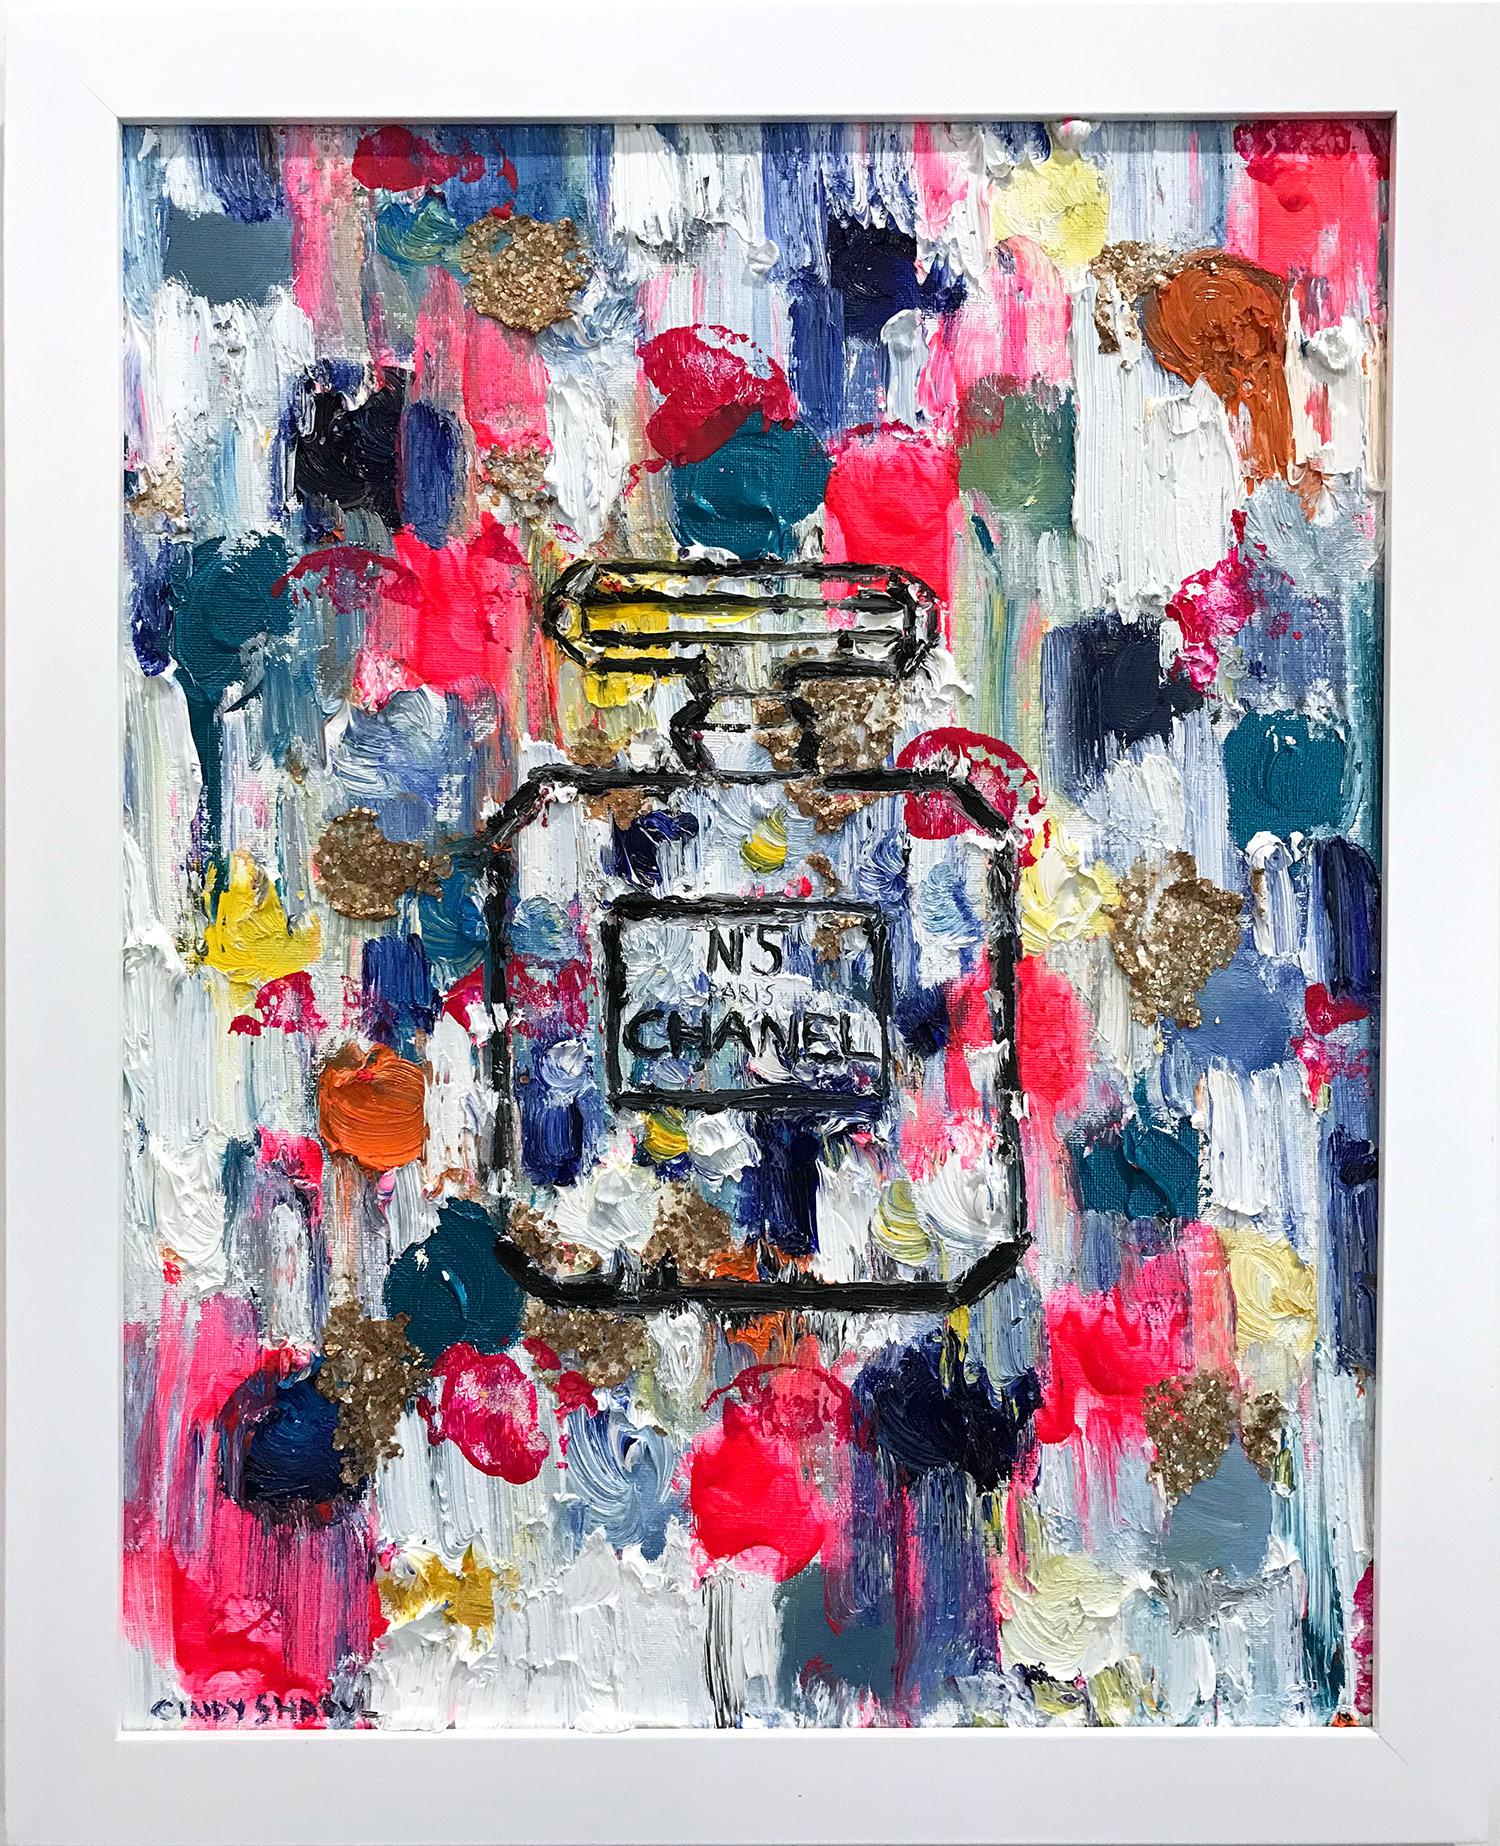 Cindy Shaoul Abstract Painting - Dripping Dots, Monte Carlo in N5 Chanel